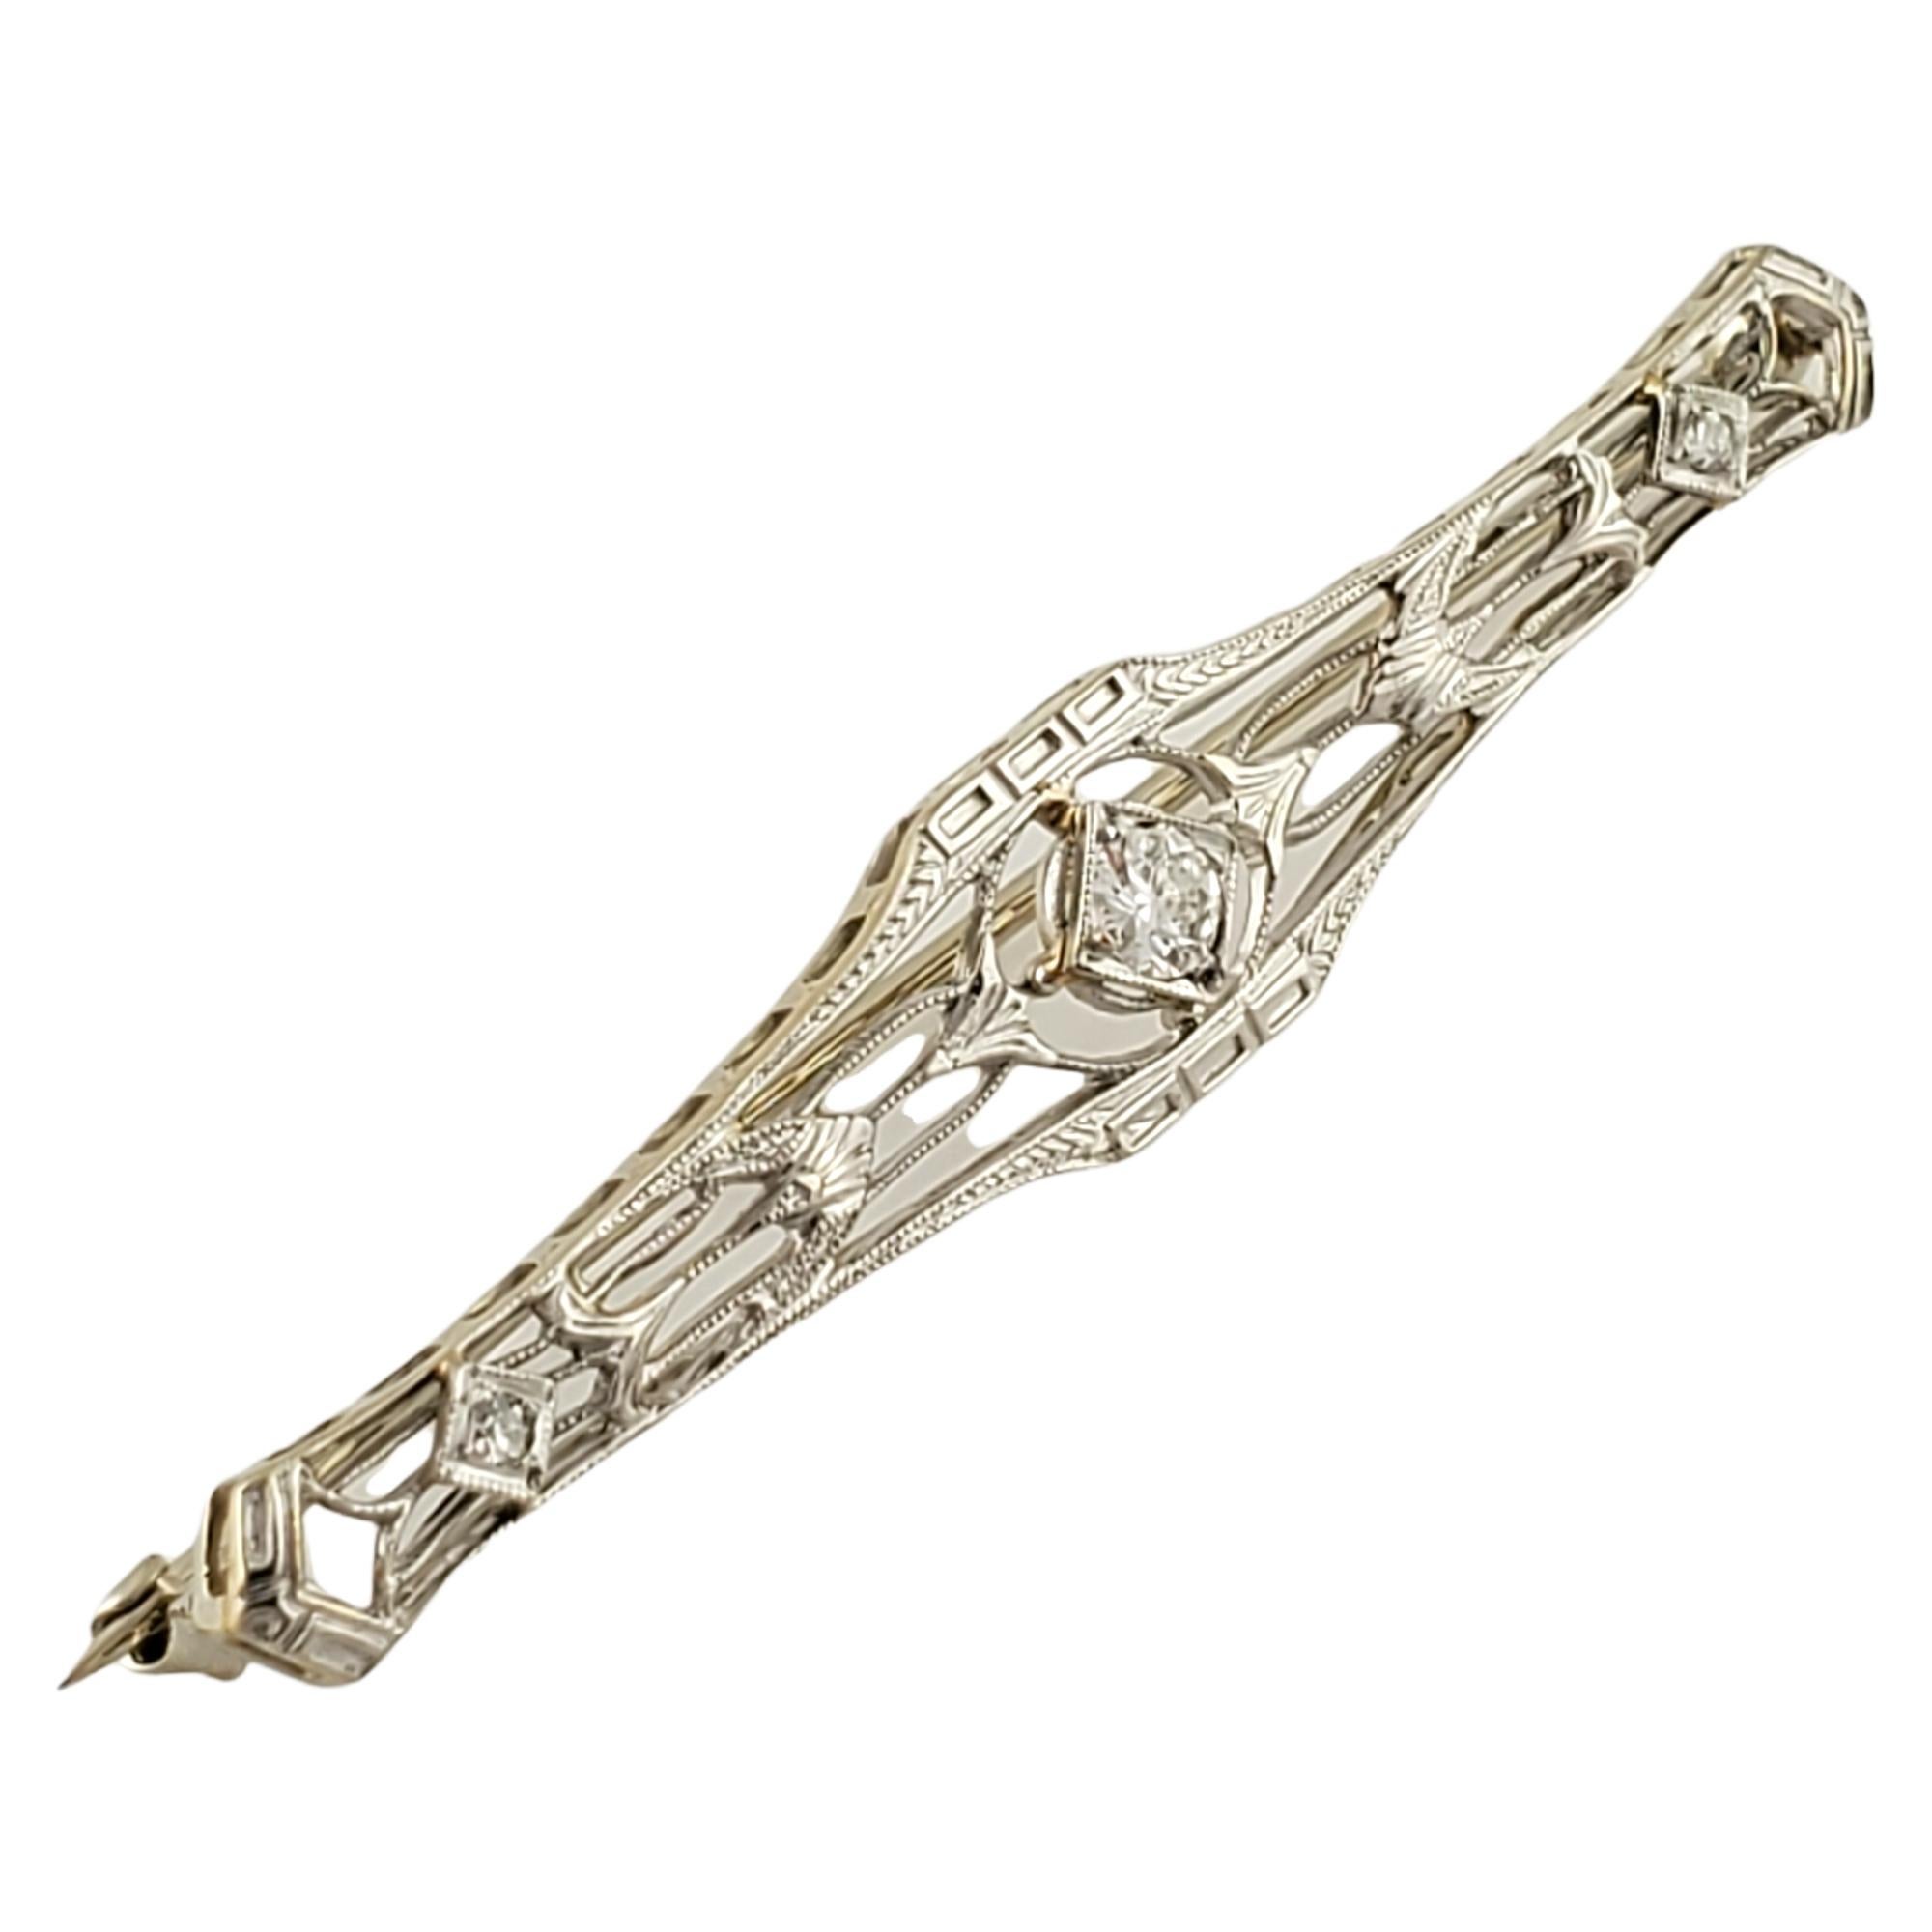 Brilliant Cut 14 Karat White Gold and Diamond Brooch/Pin #3850 For Sale